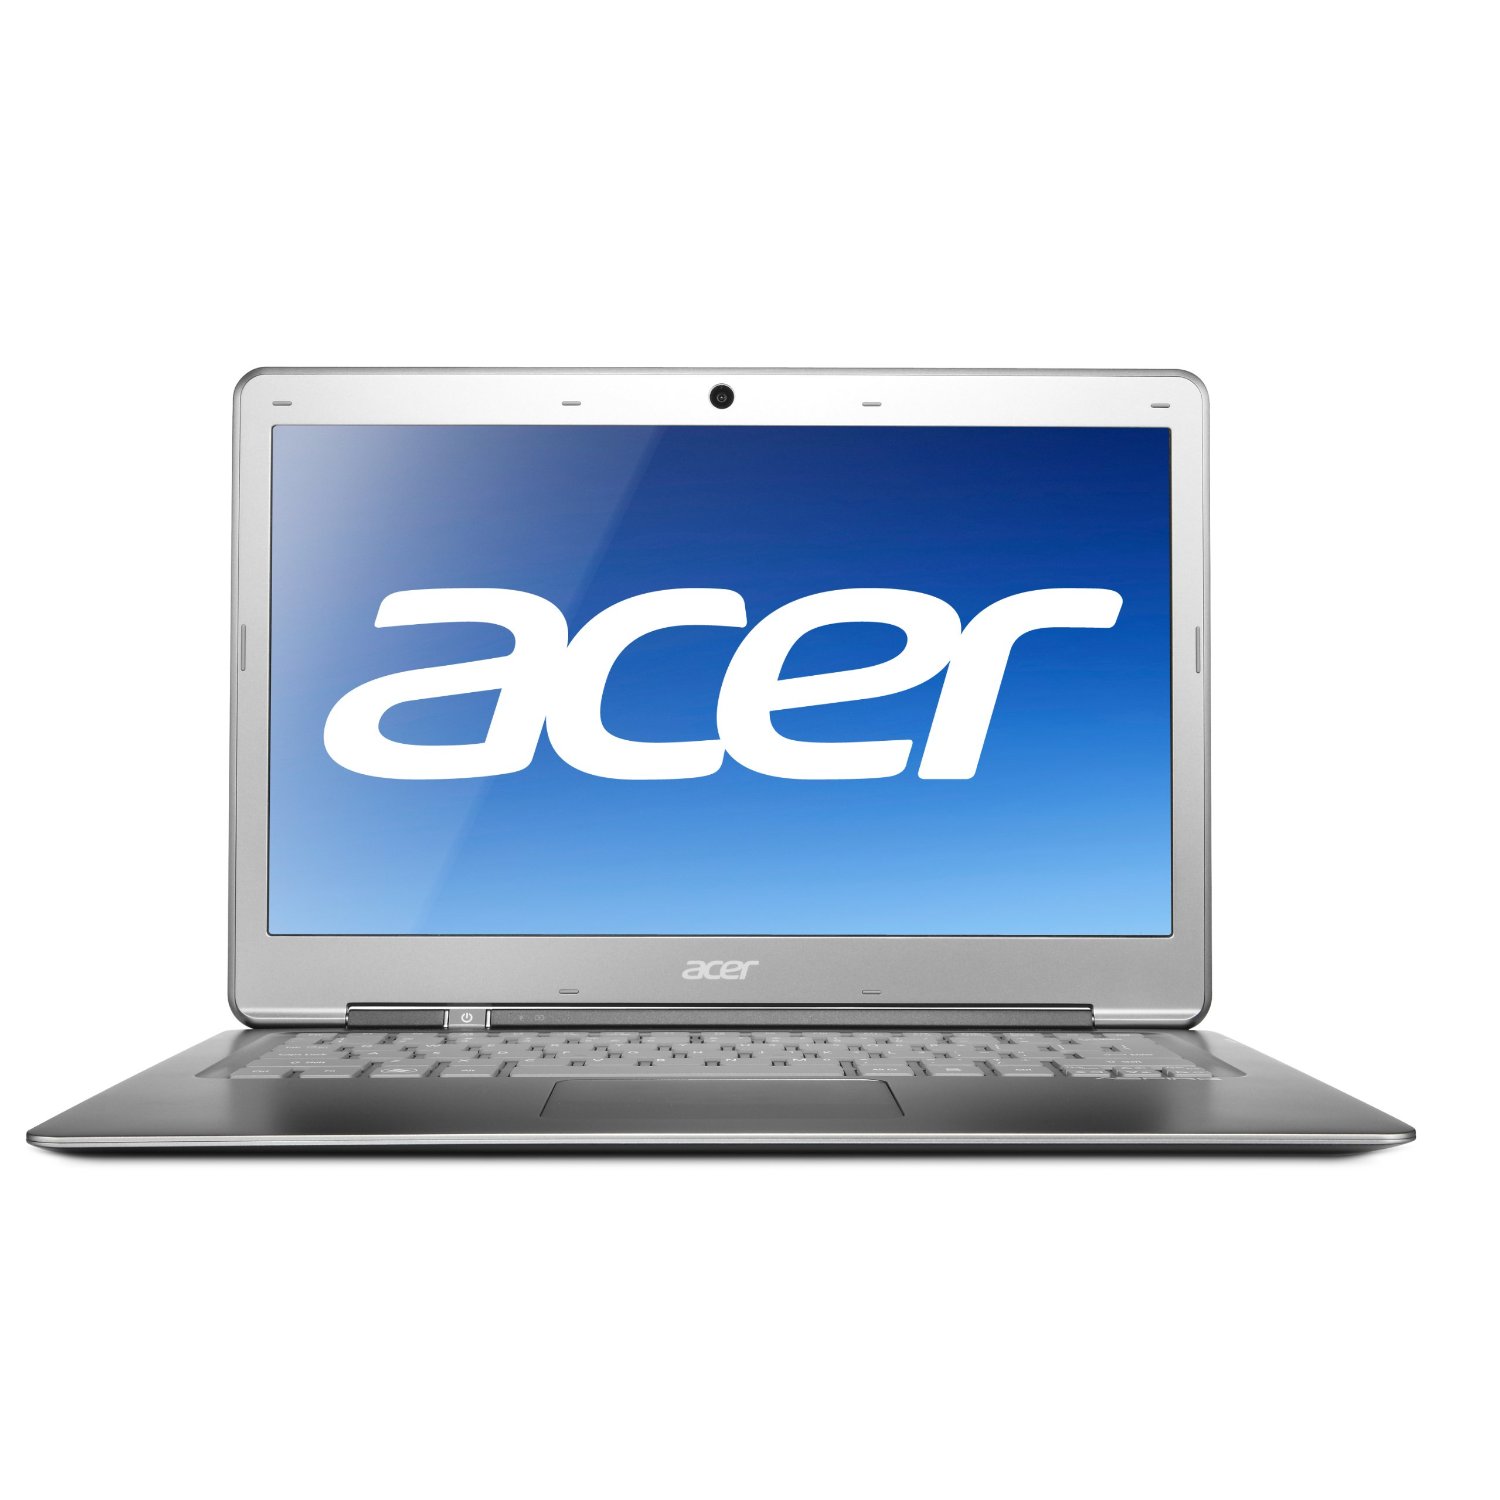 http://thetechjournal.com/wp-content/uploads/images/1110/1318646337-acer-aspire-s39516646-ultrabook-with-133inch-hd-display-1.jpg